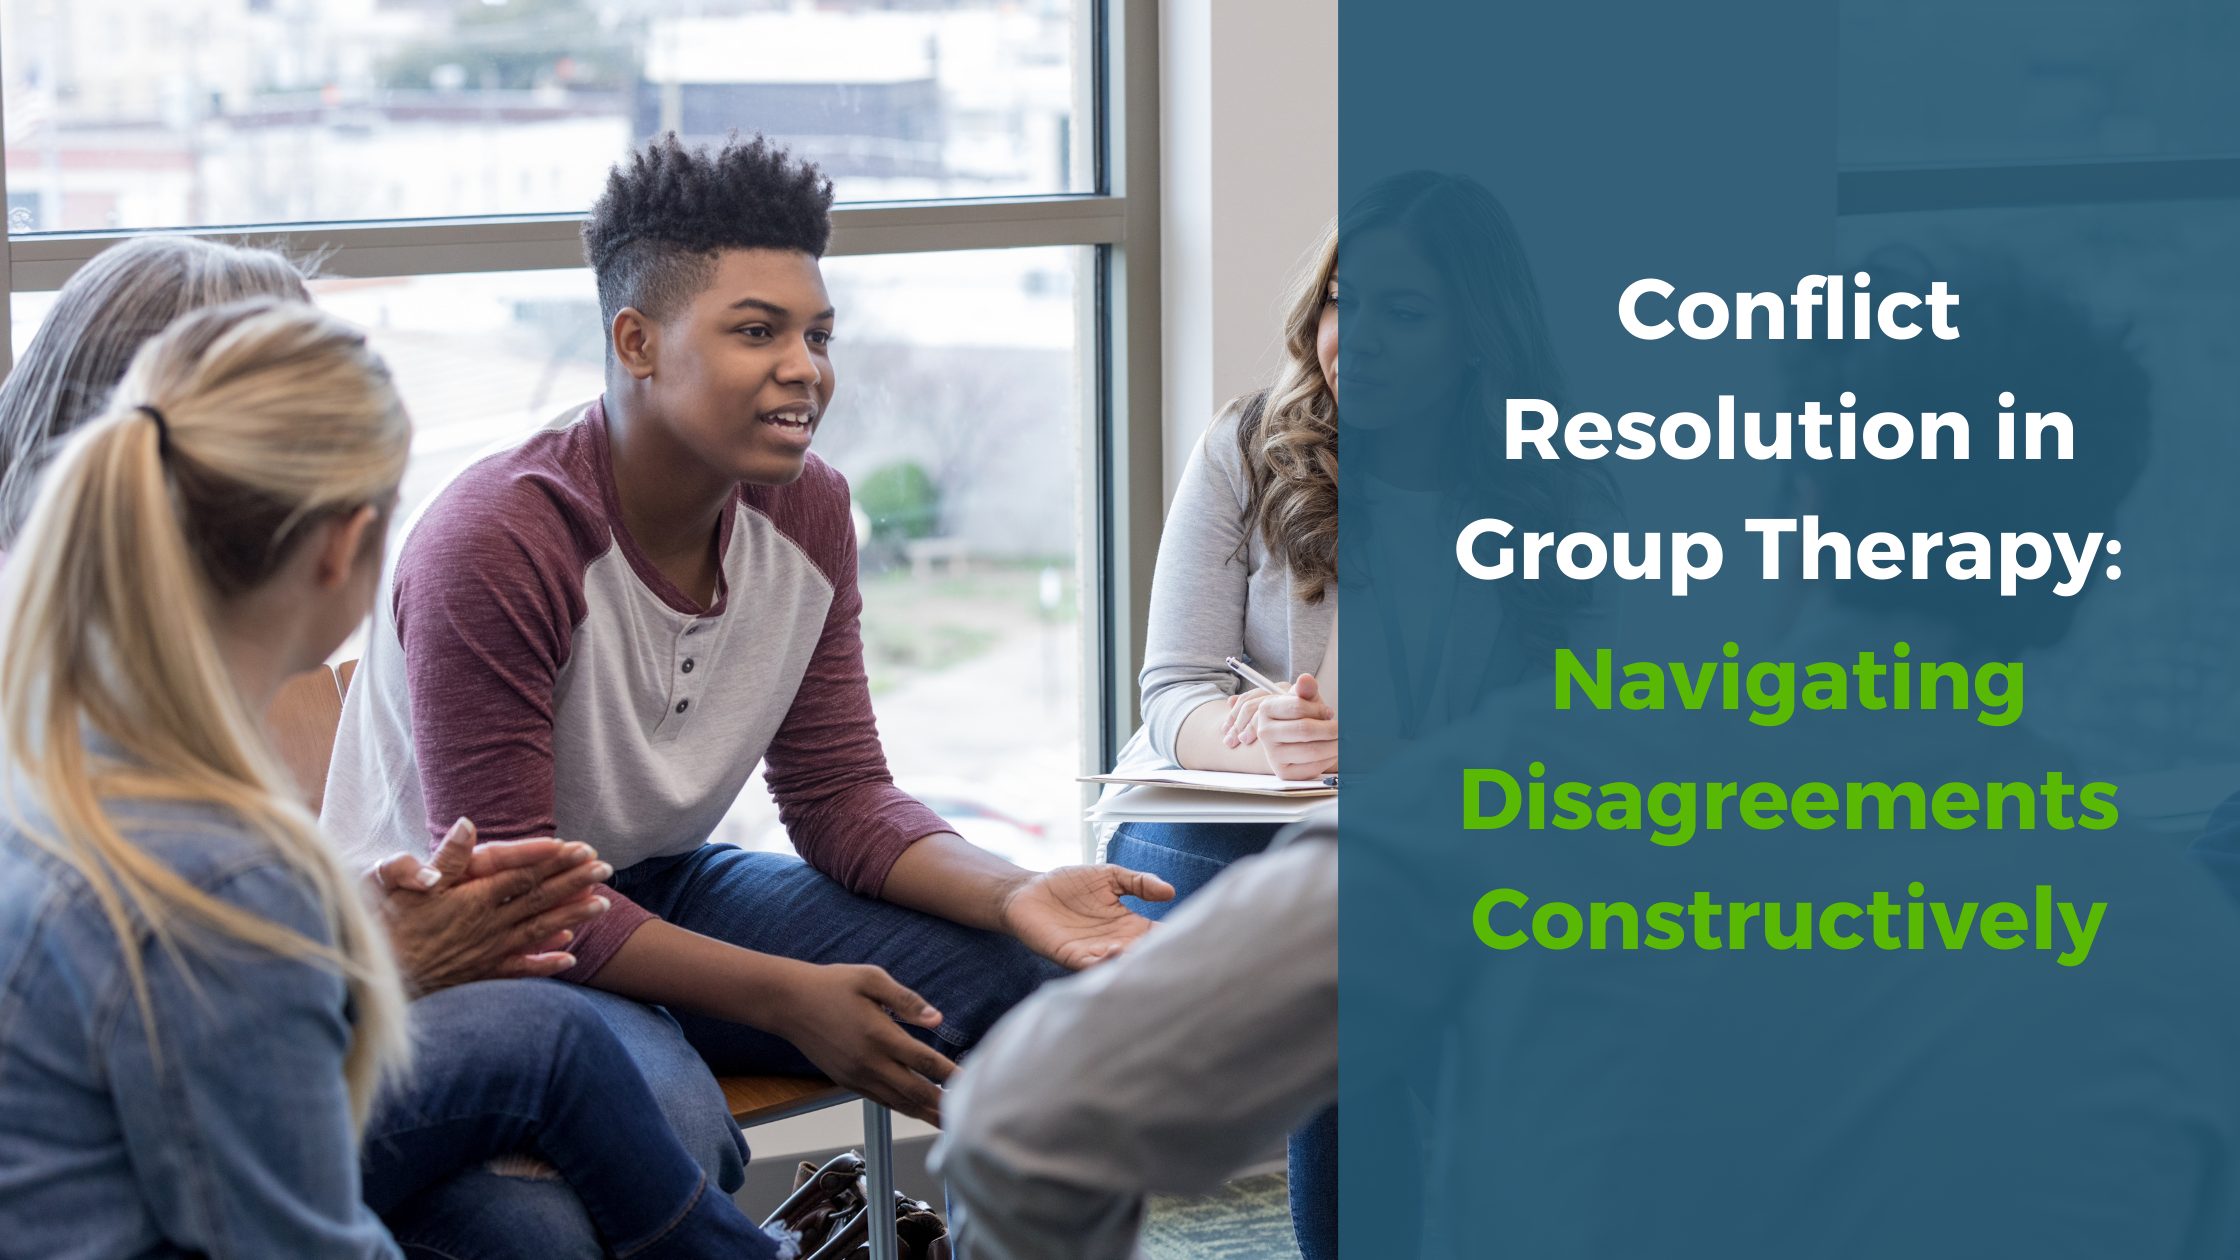 Conflict resolution in group therapy